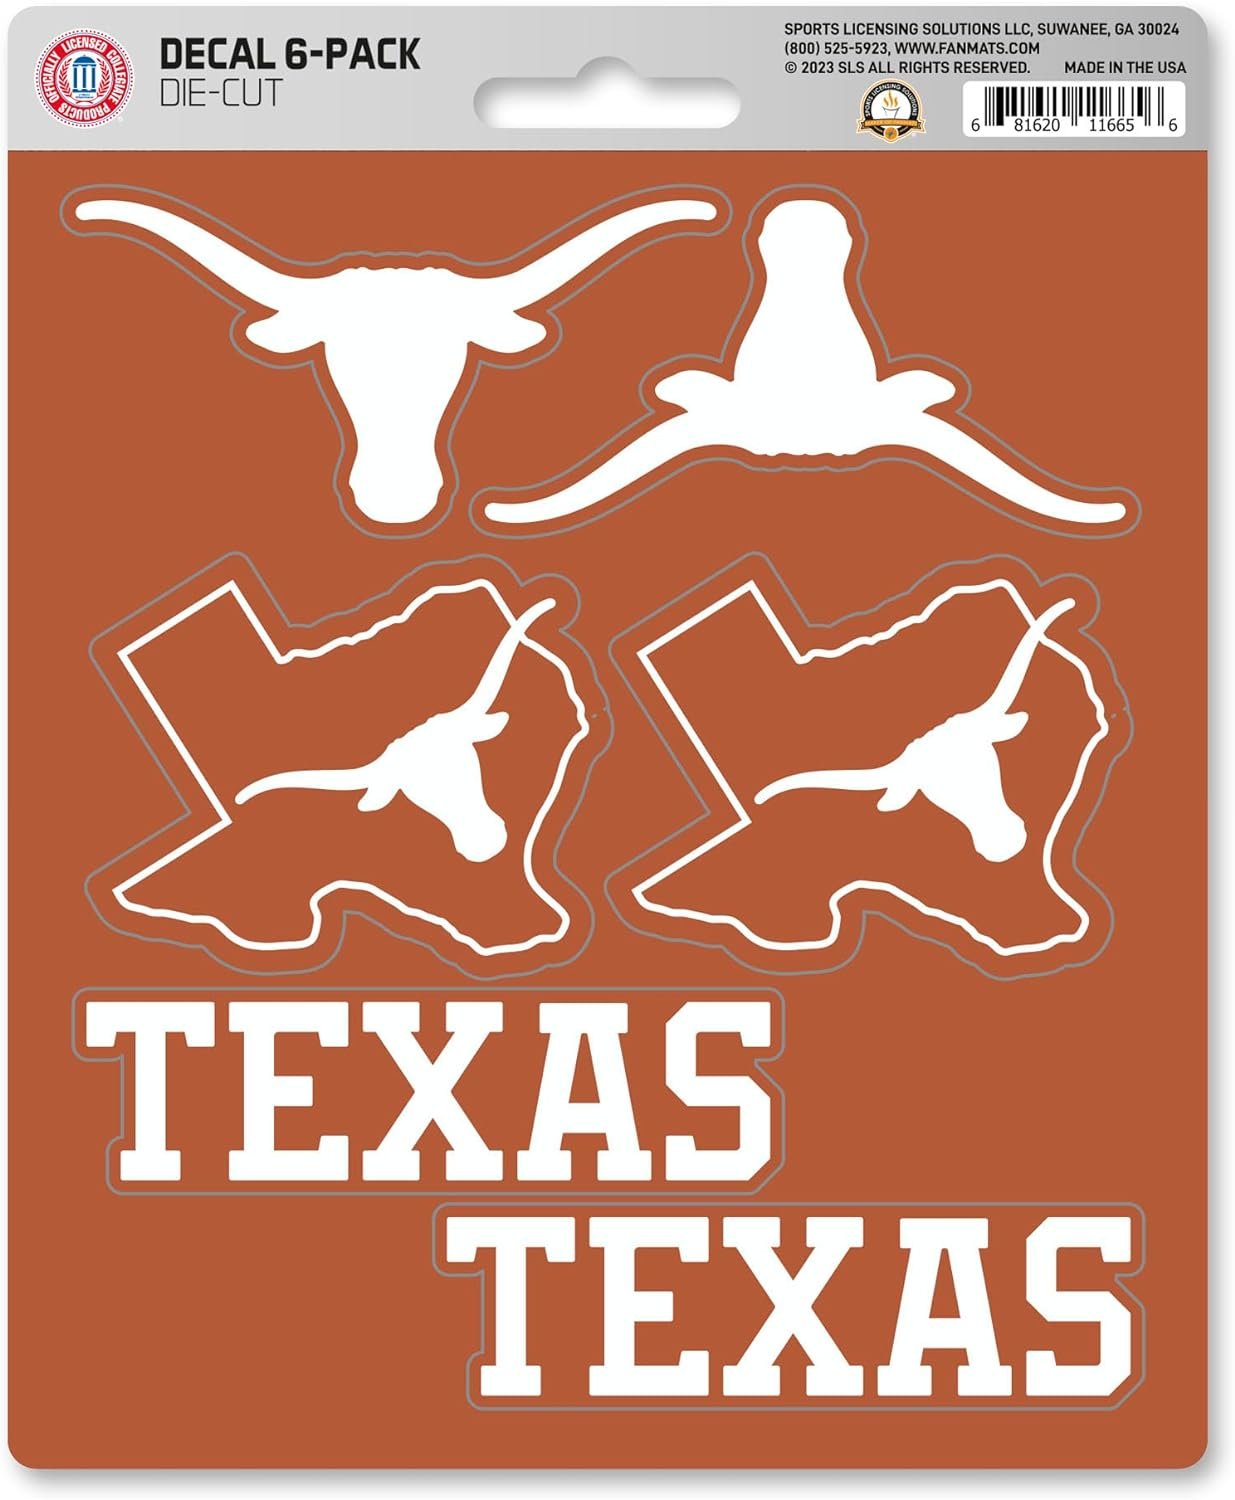 University of Texas Longhorns 6-Piece Decal Sticker Set, 5x6 Inch Sheet, Gift for football fans for any hard surfaces around home, automotive, personal items